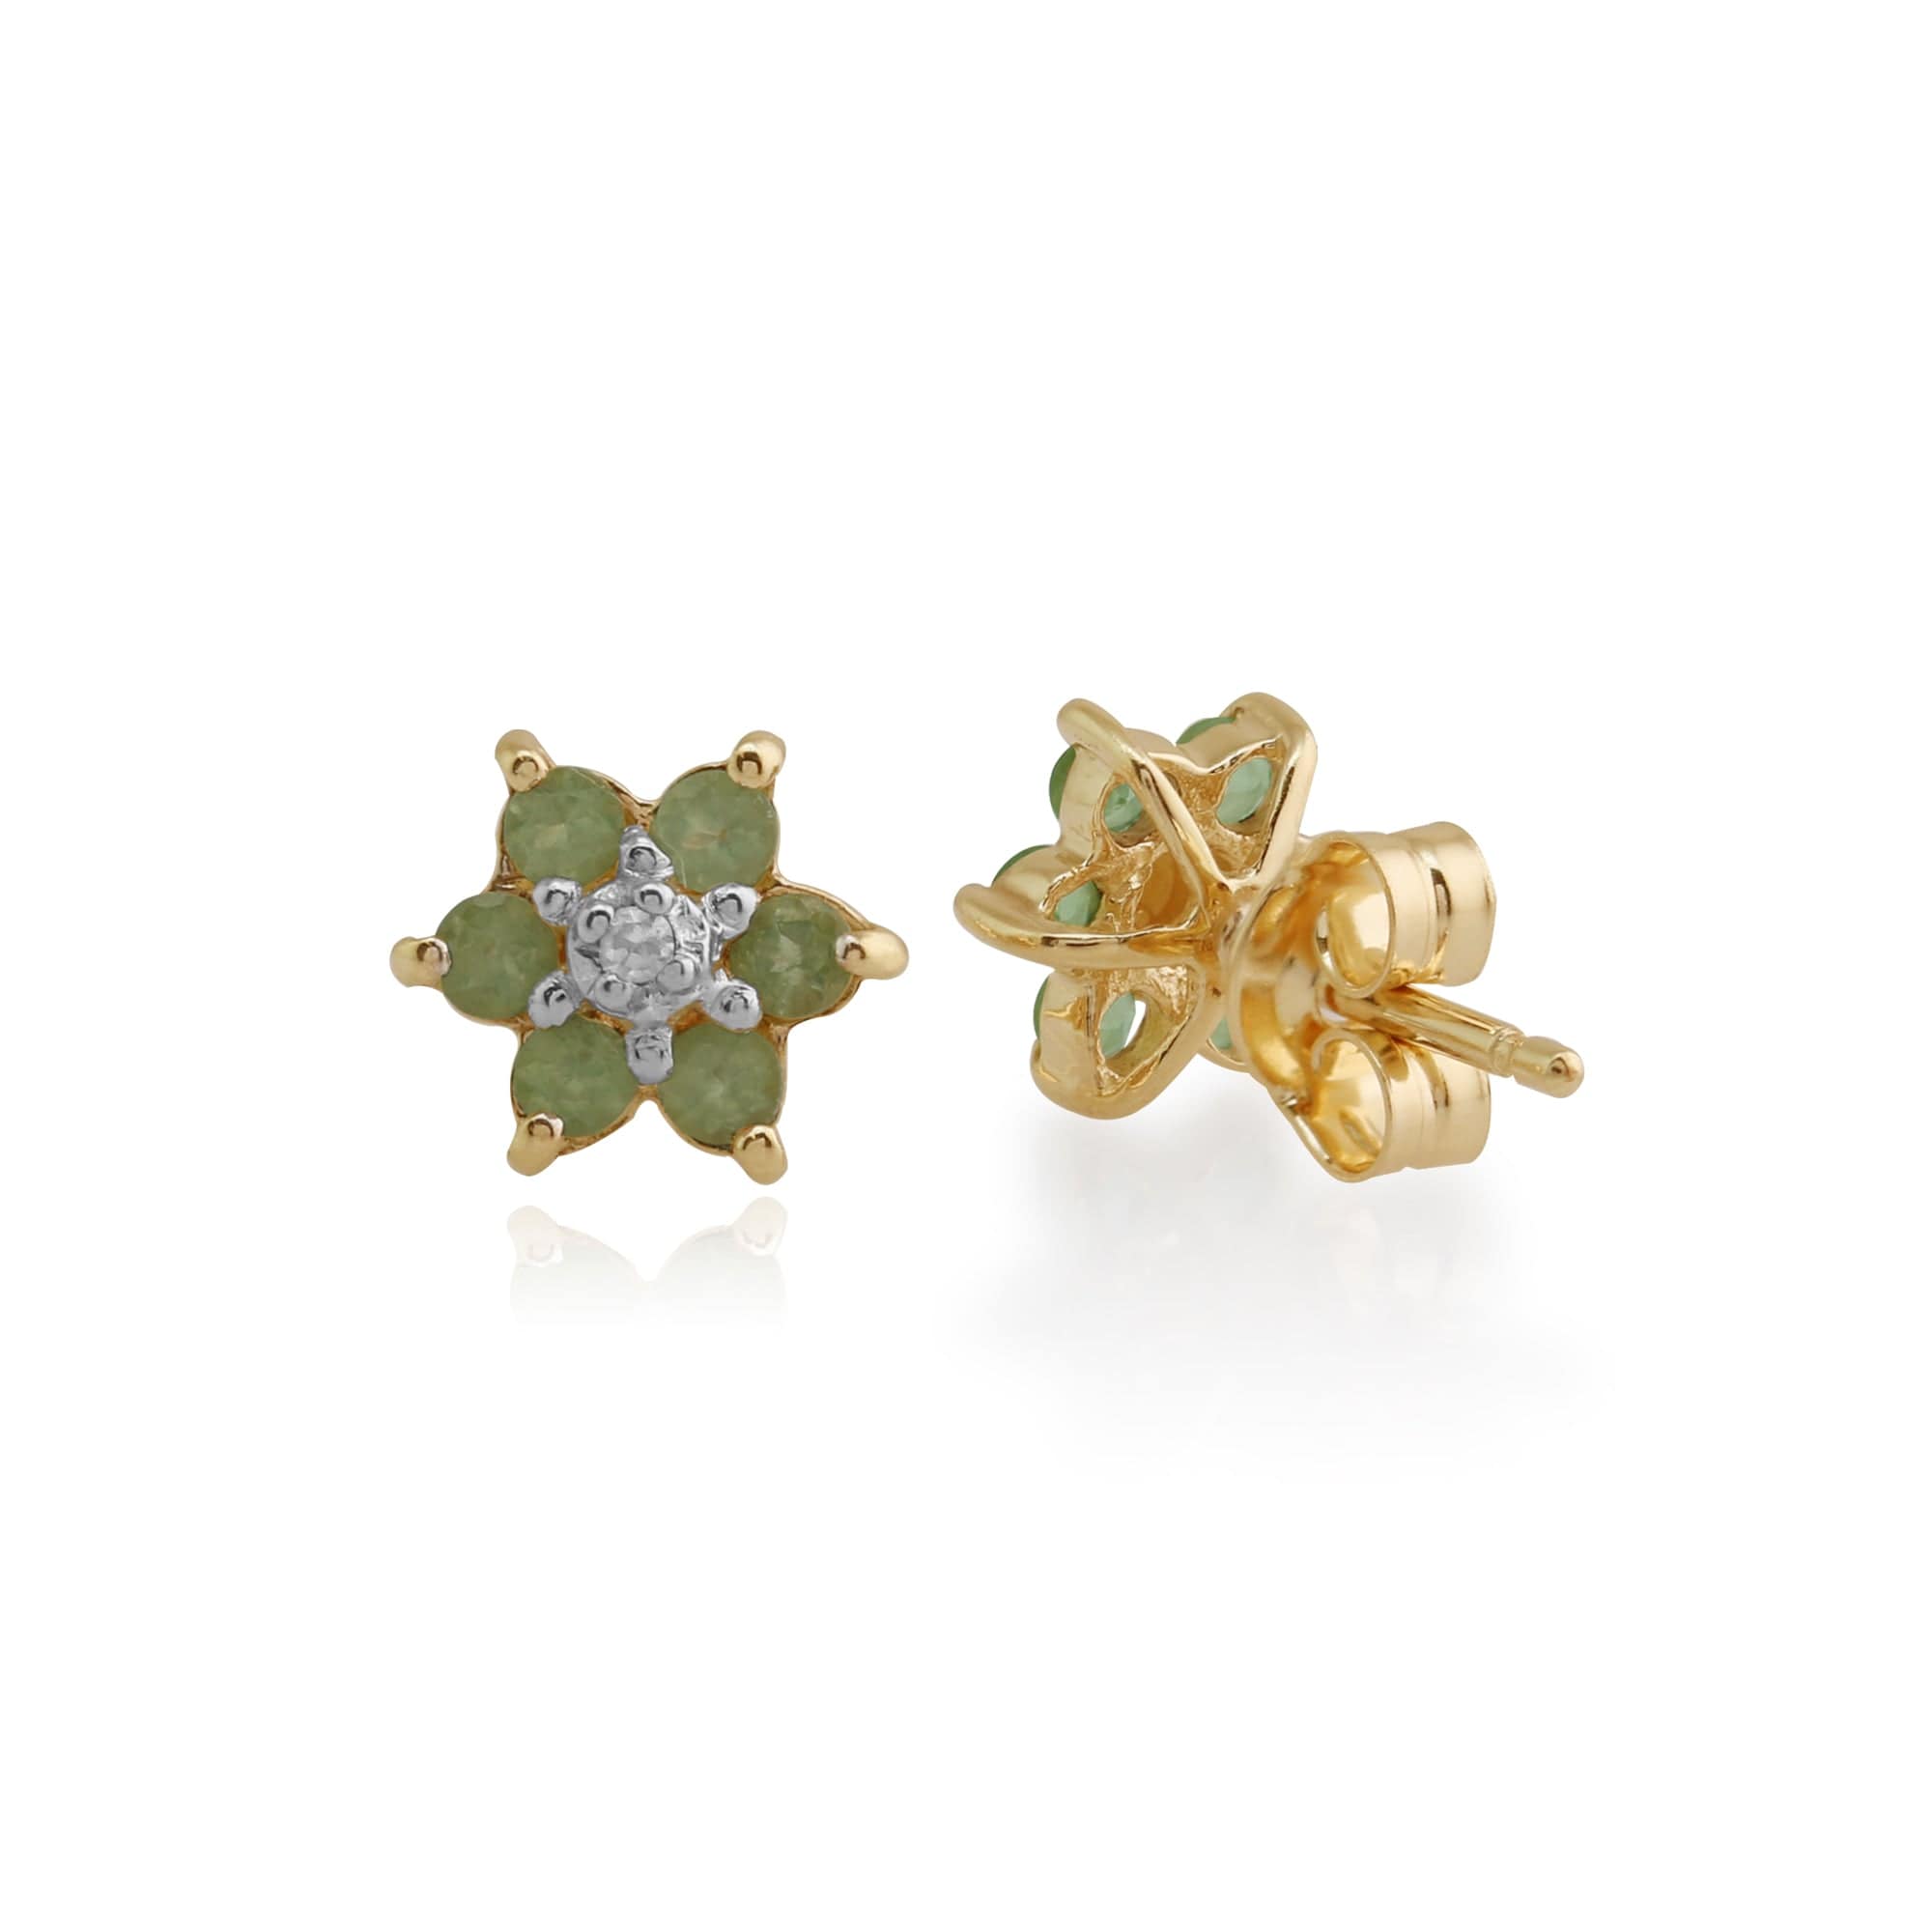 Floral Round Peridot & Diamond Cluster Stud Earrings in 9ct Yellow Gold - Gemondo